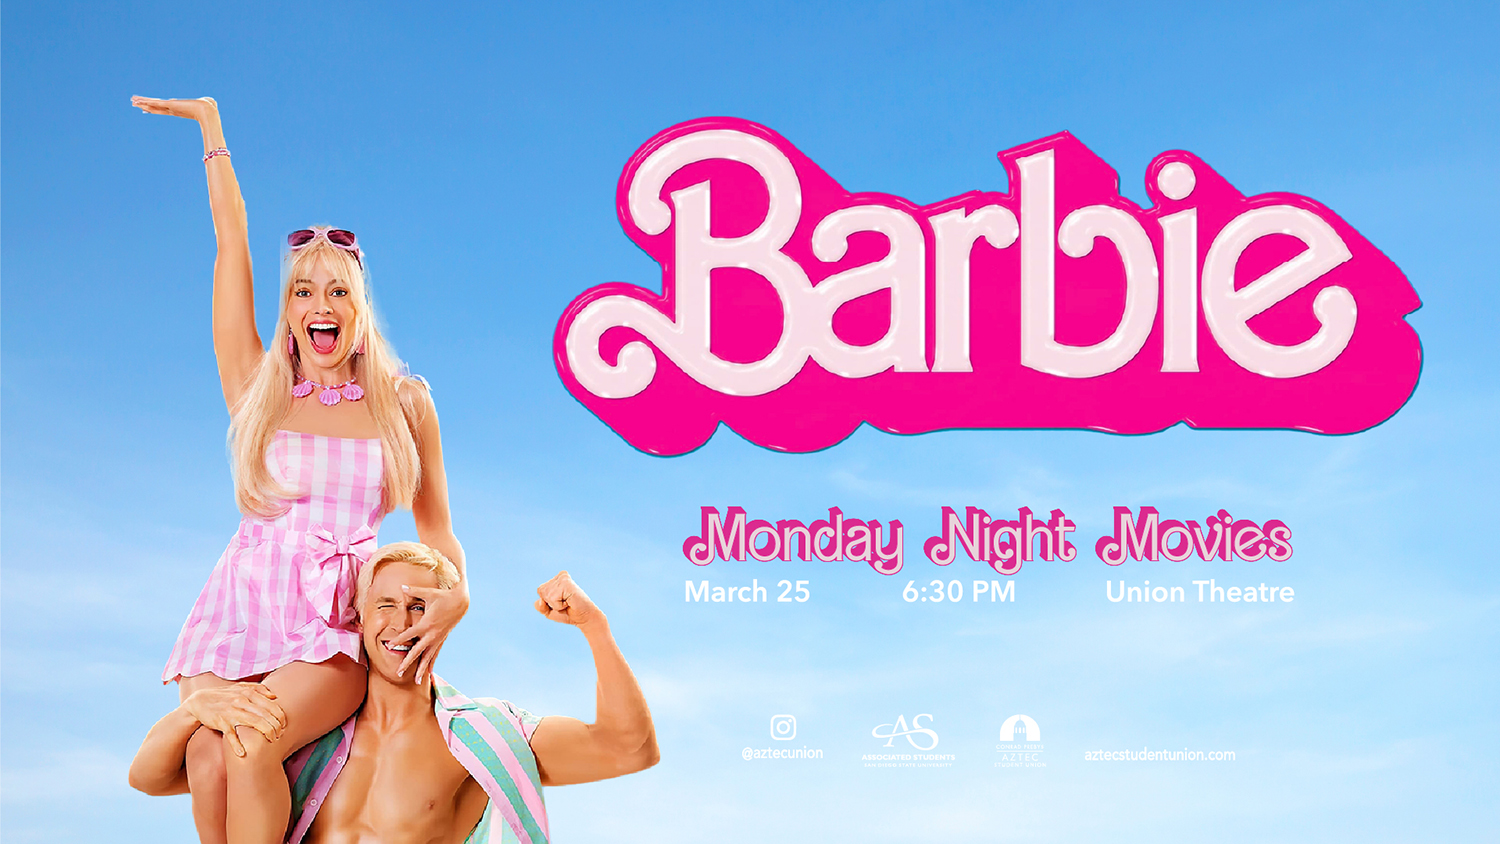 Image of Barbie on Ken's shoulder with sky blue background and pink Barble logo for the movie title and in pink text saying Monday night movies. For more information, please visit https://as.sdsu.edu/union/asub/events/